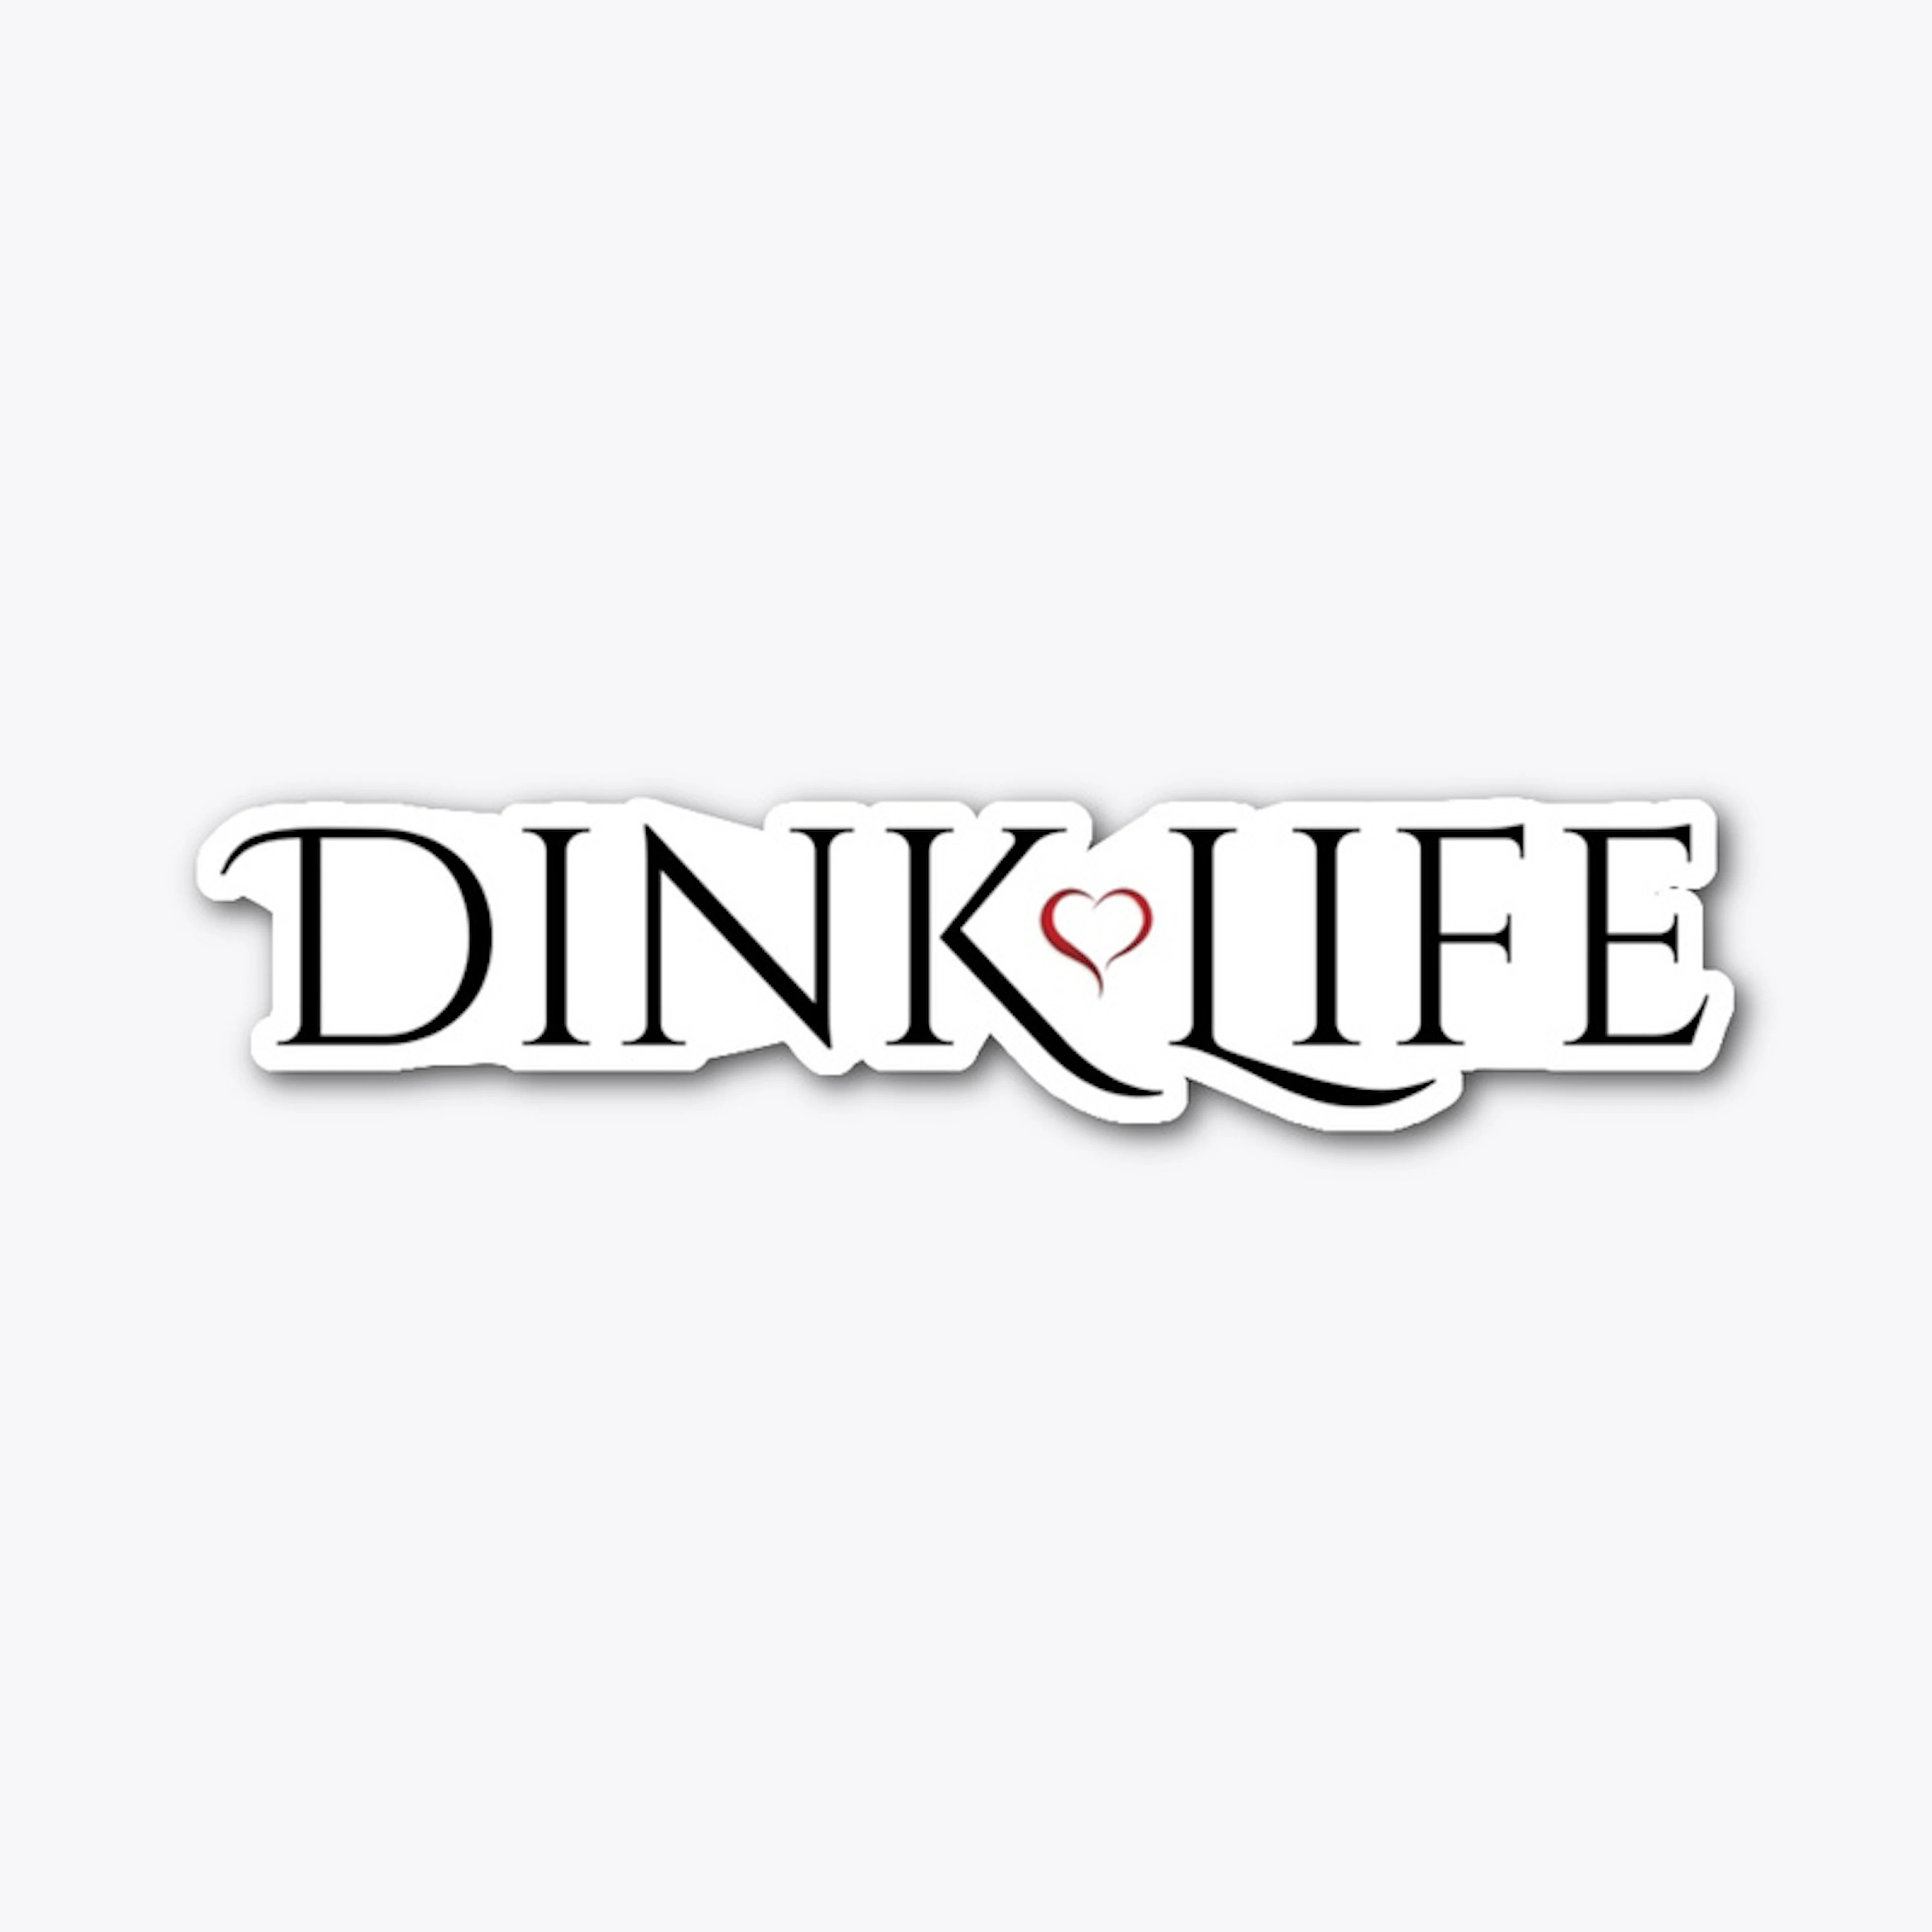 MY DINKLIFE - ITS THE BEST